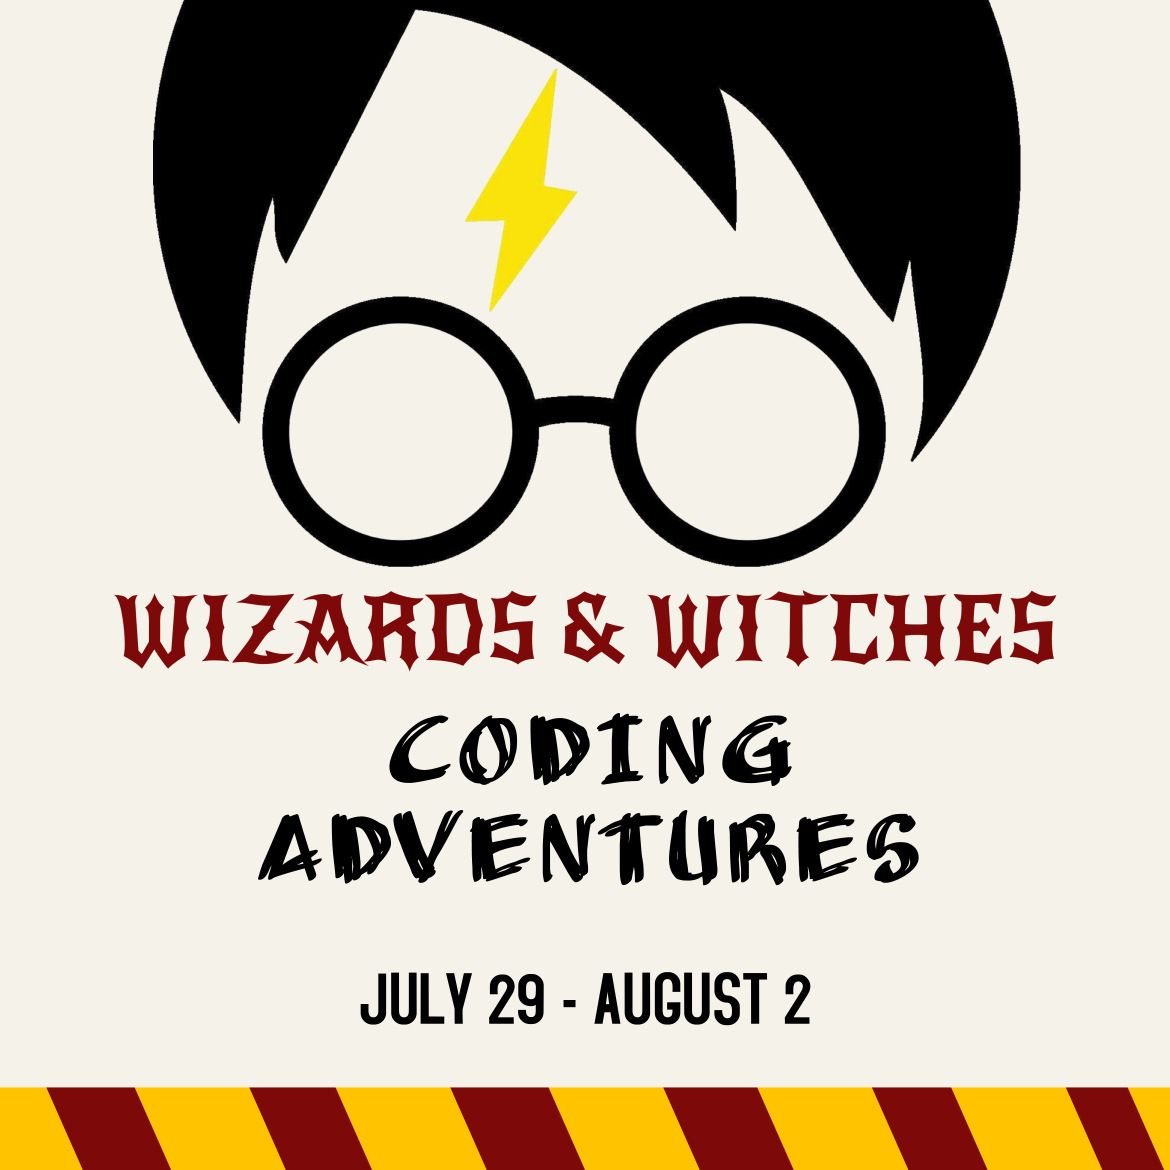 Code4Bots Wizards & Witches Coding Adventures Half-Day Morning Summer Camp